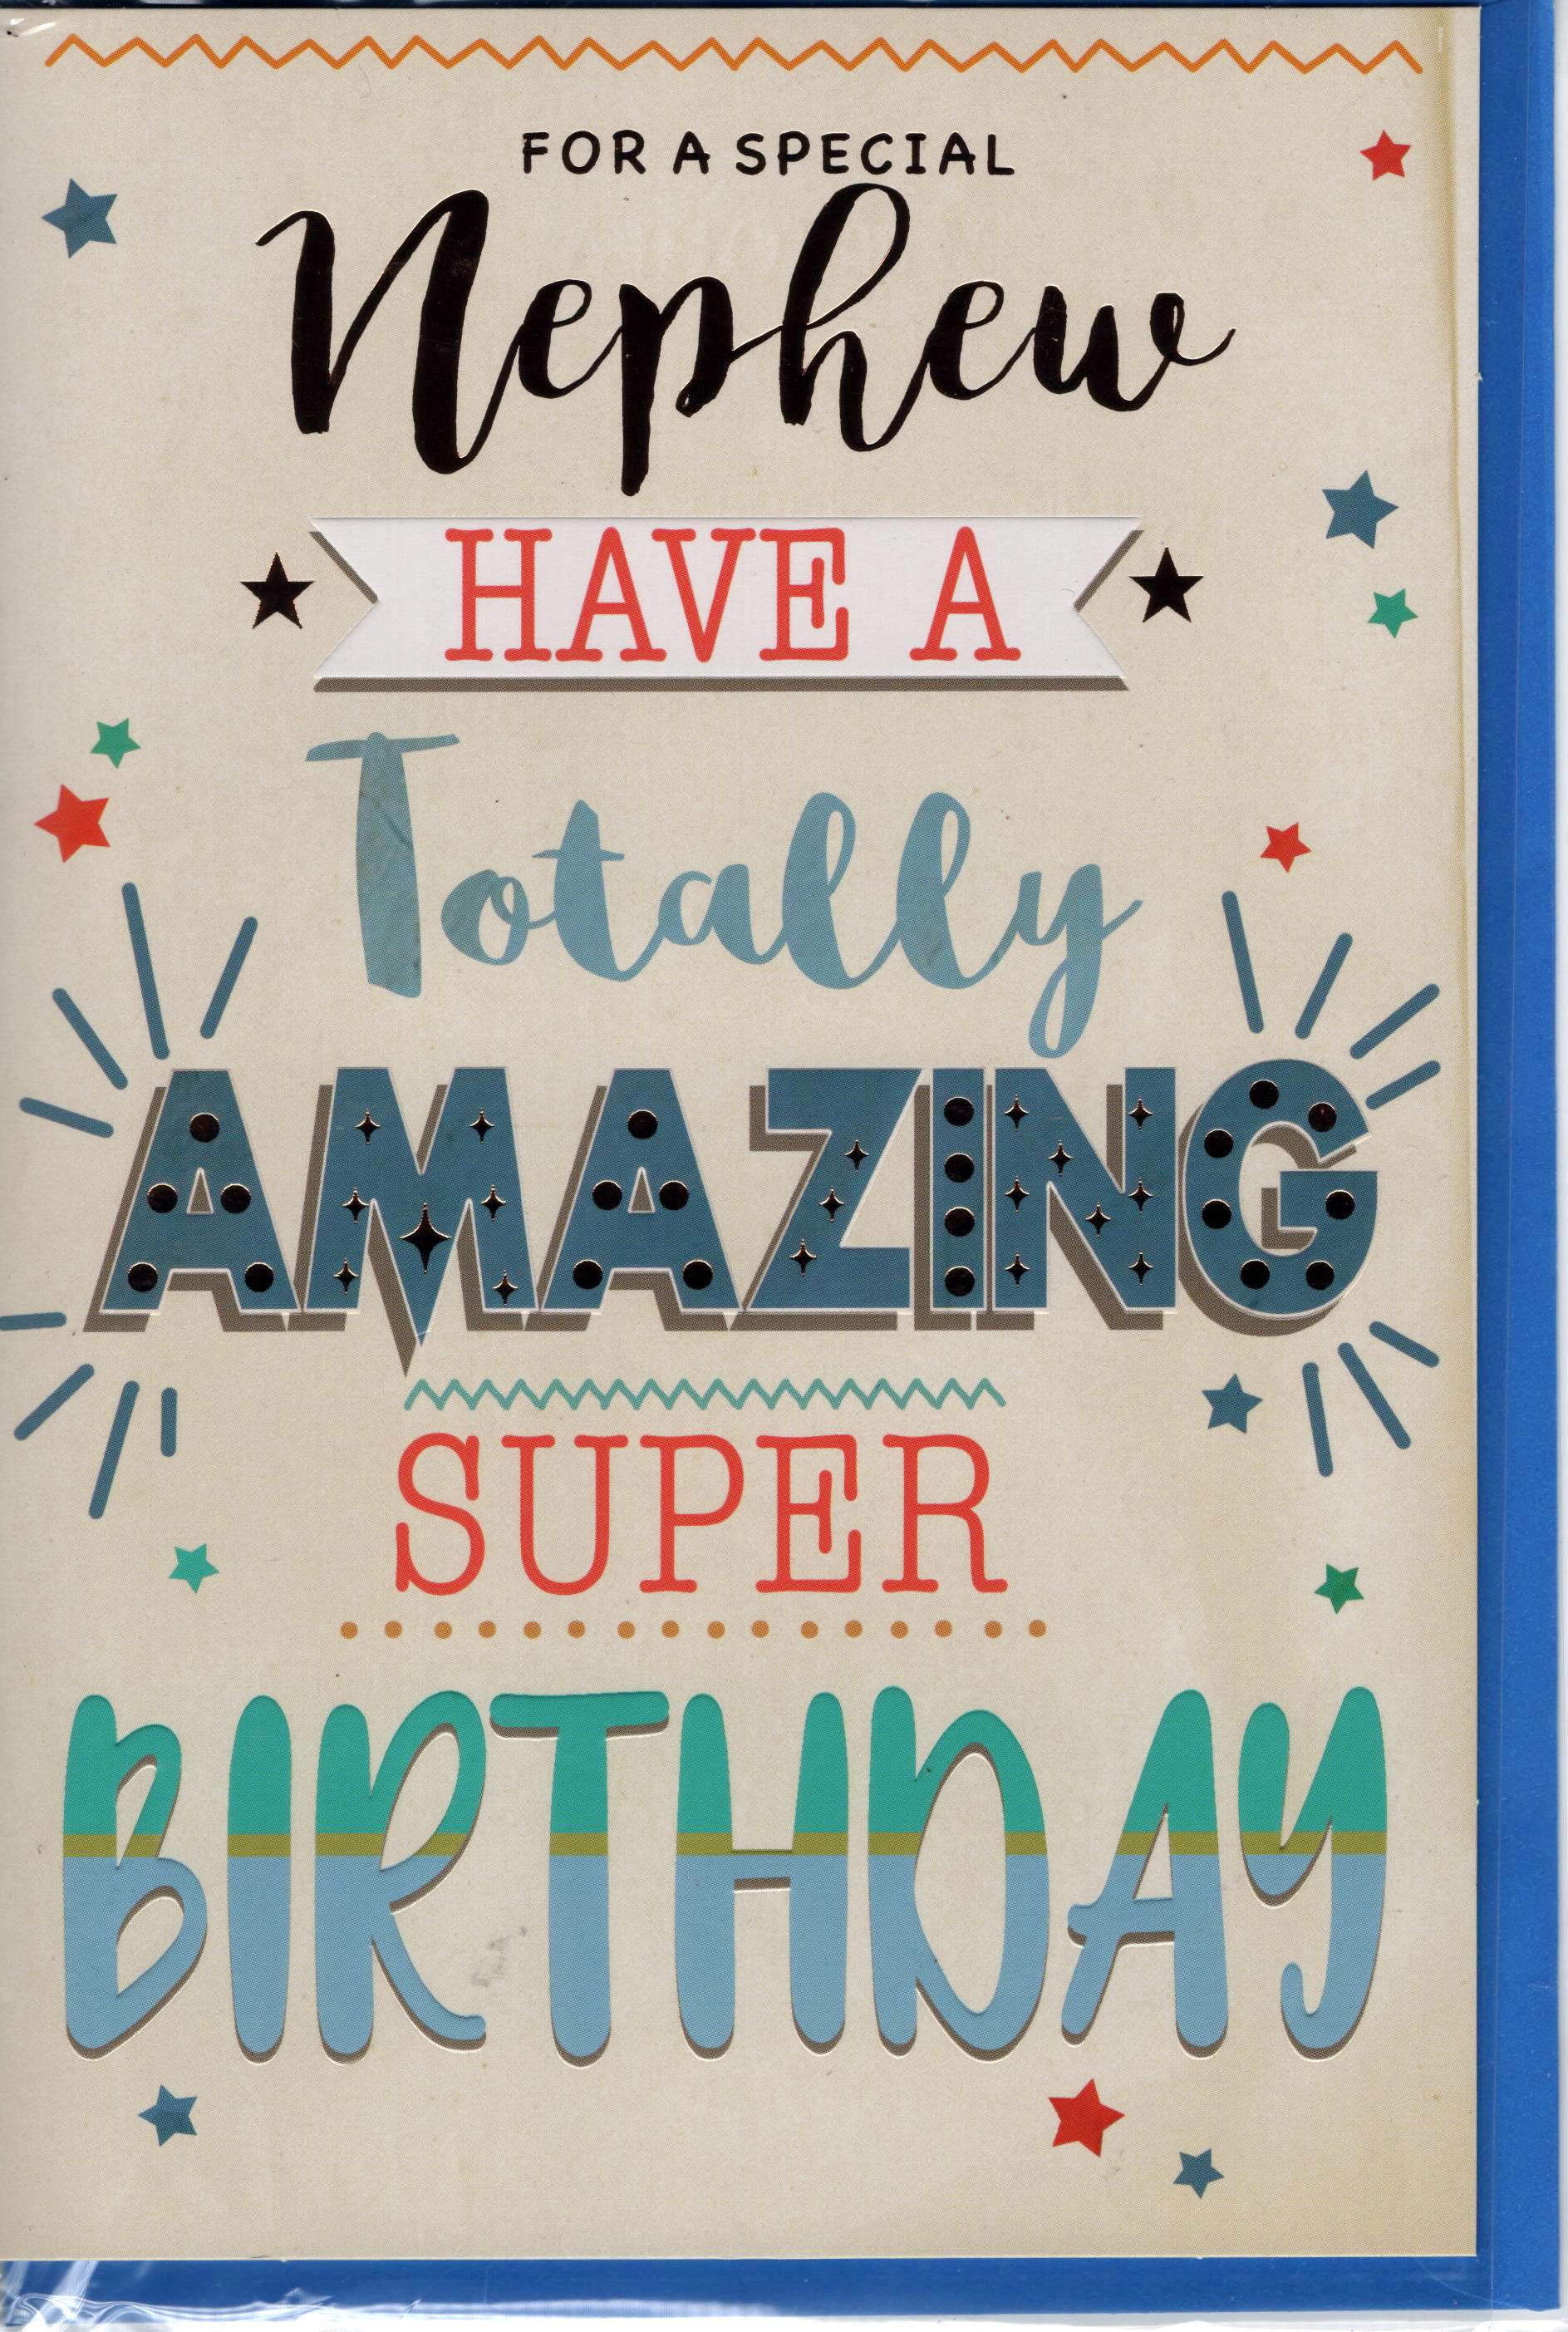 For a Special Nephew Have a Totally Amazing Super Birthday